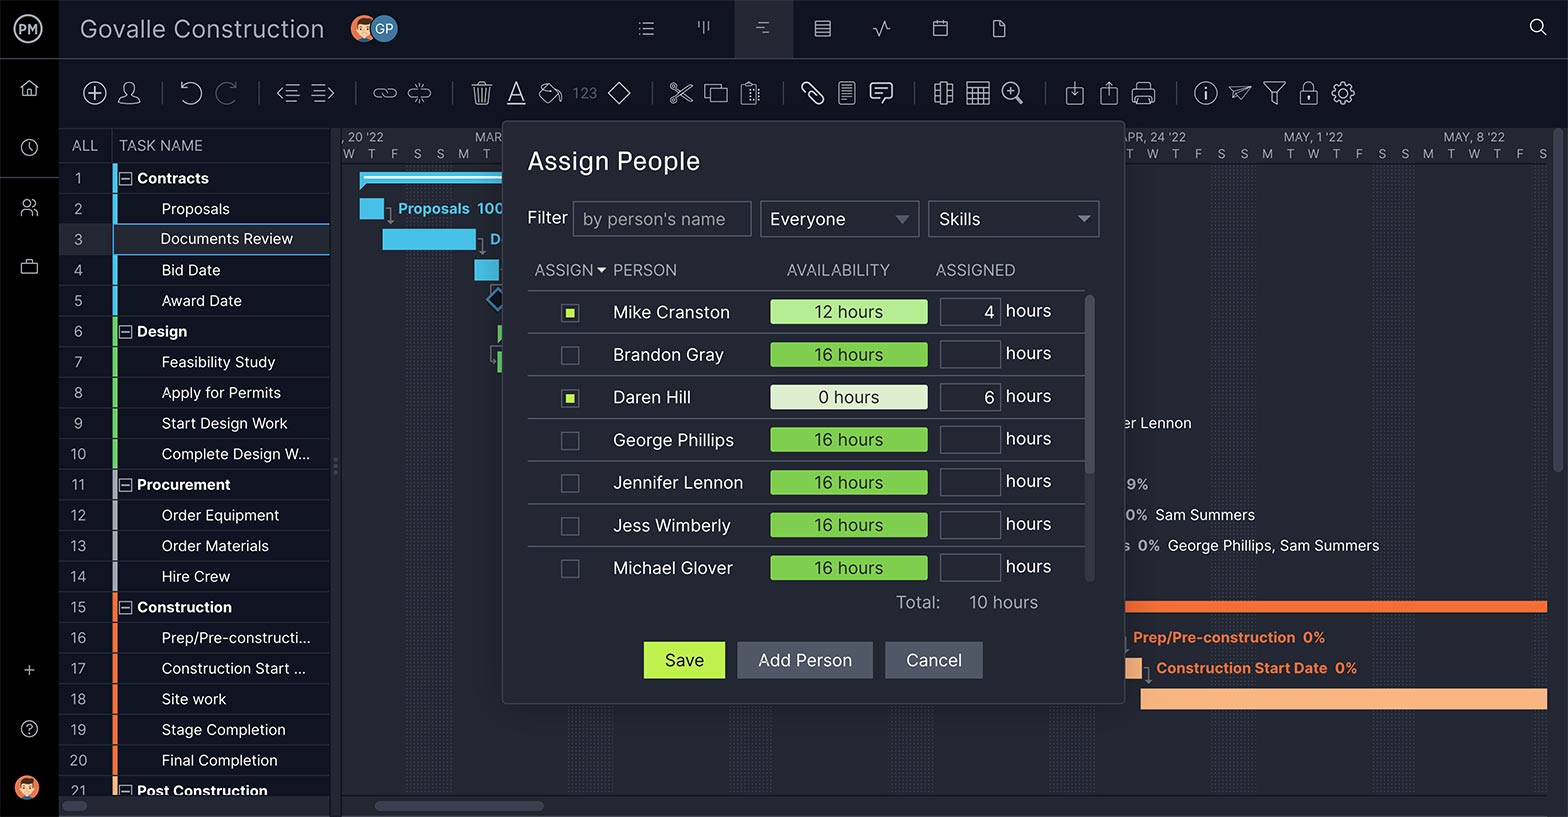 ProjectManager's Gantt chart lets you create project timelines and assign tasks